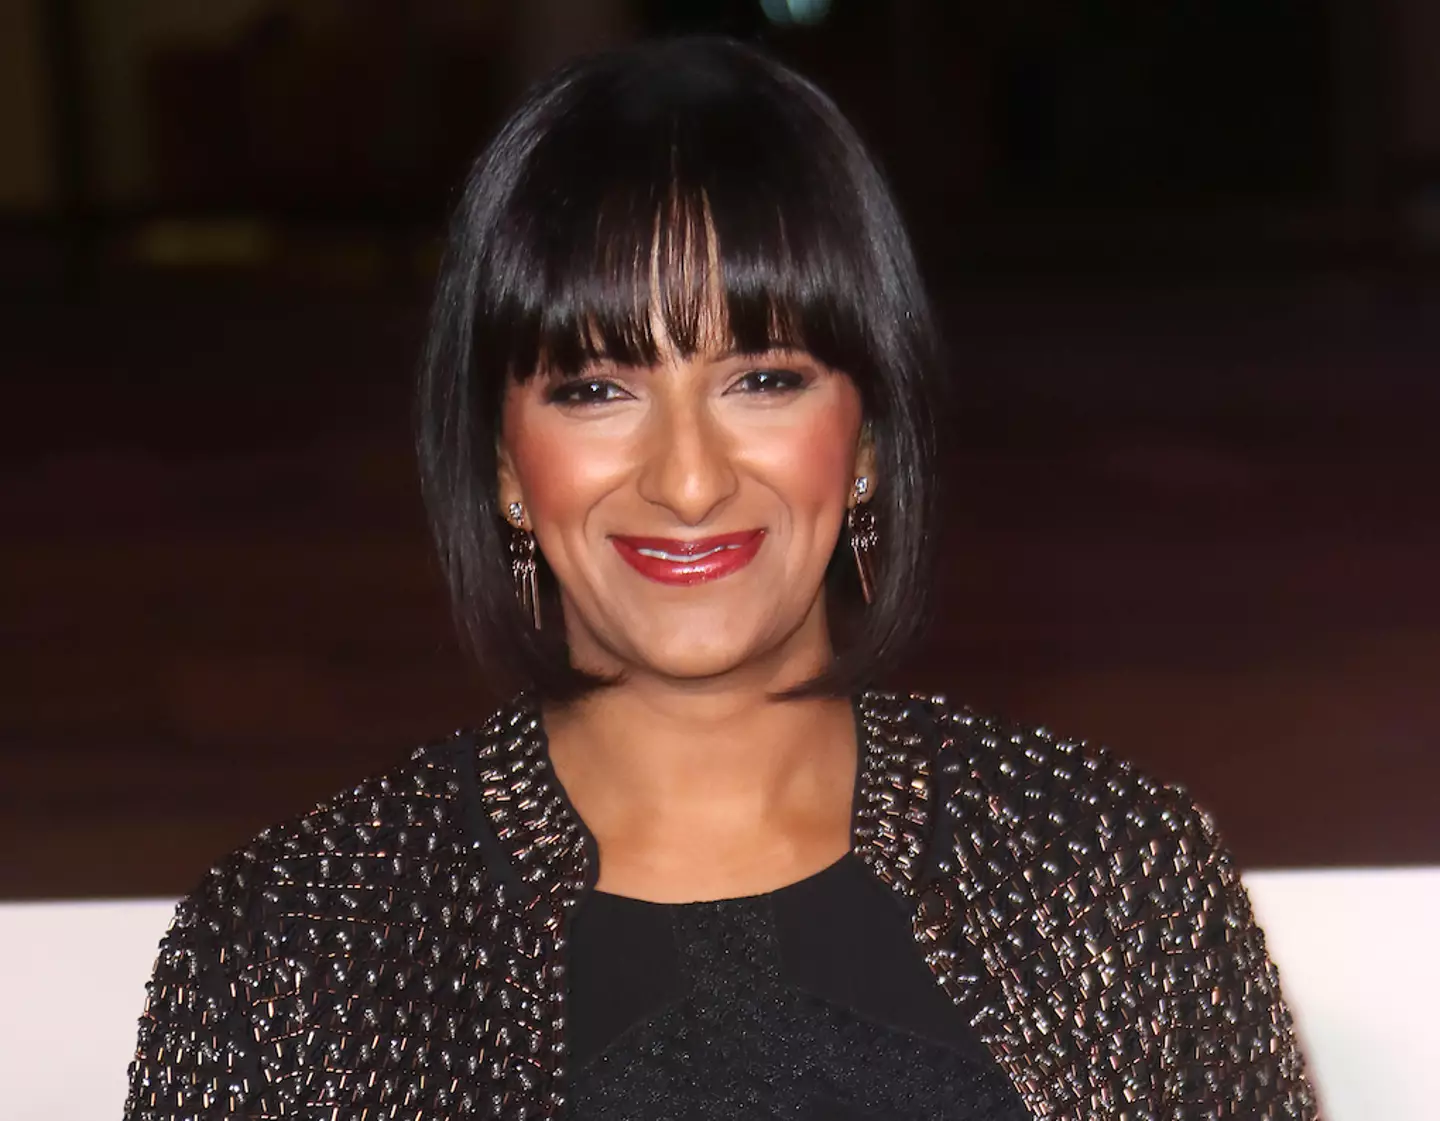 Ranvir Singh has spoken about her own experience of sexual assault (